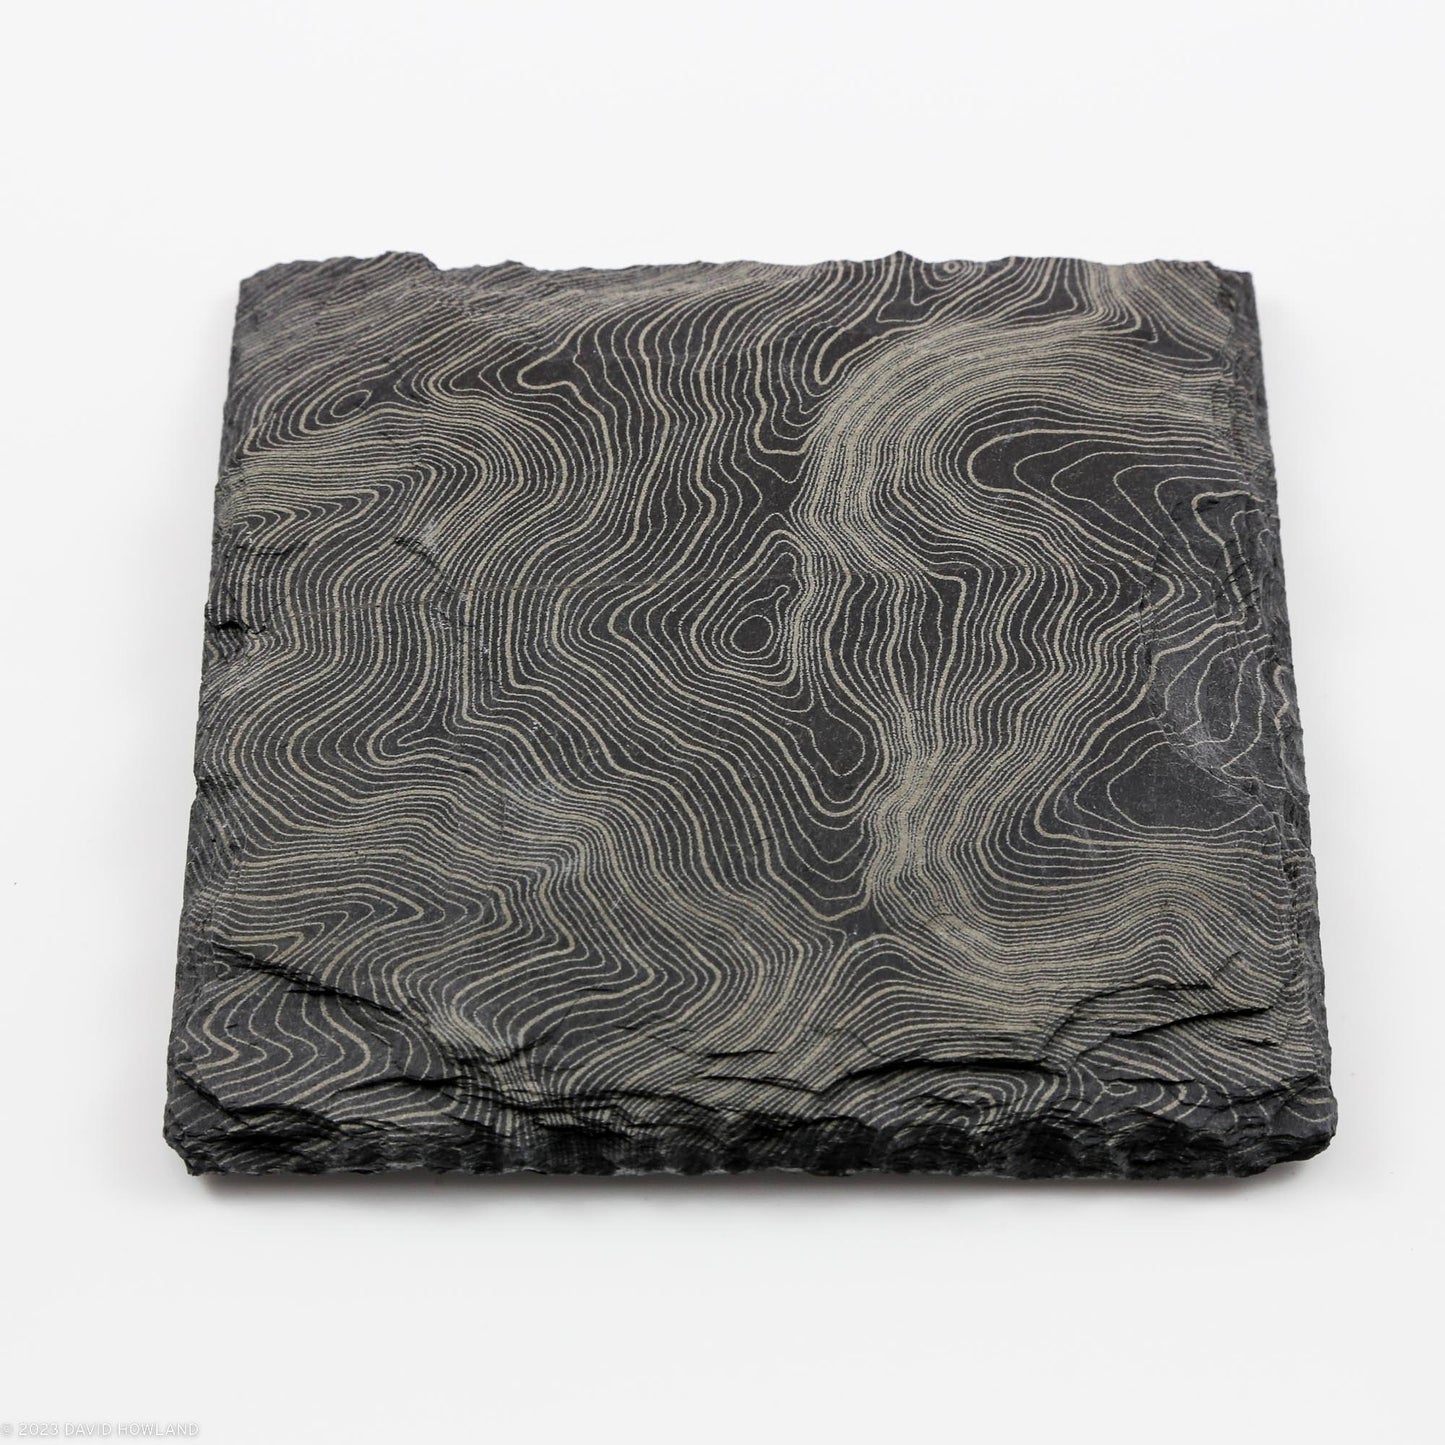 South Carter Mountain Topographic Map Slate Coaster